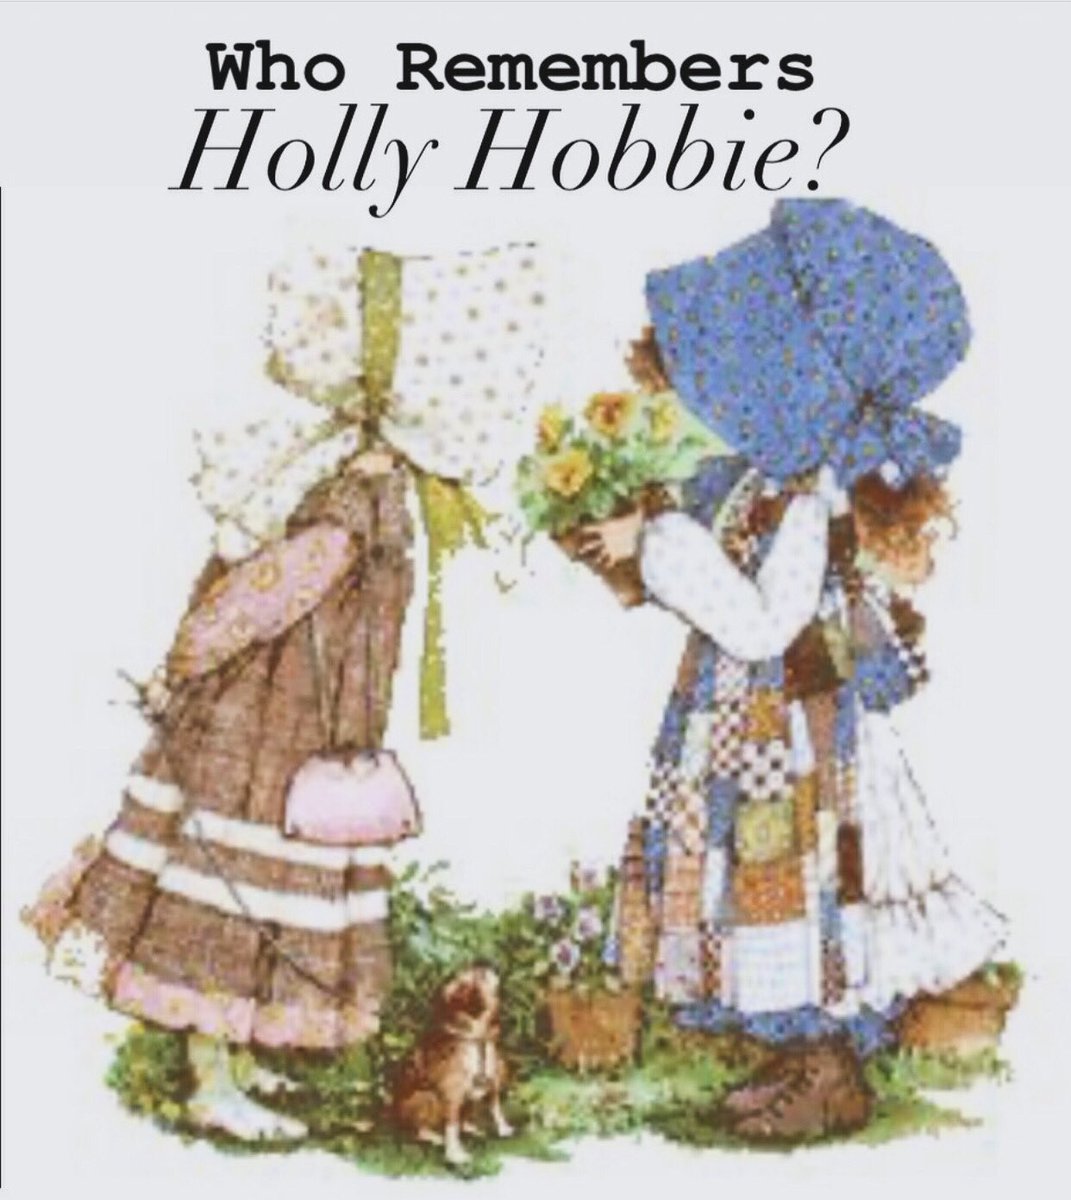 In the late 1960s, a Woman By the Name of Denise Holly Hobbie SoldHer Artwork of a Cat-Loving, Rag-Dress Wearing Little Girl in a Bonnet to American Greetings in Cleveland, Ohio. And the Rest is History. #HollyHobbie #AmericanGreetings #RagDolls #Dolls #Doll